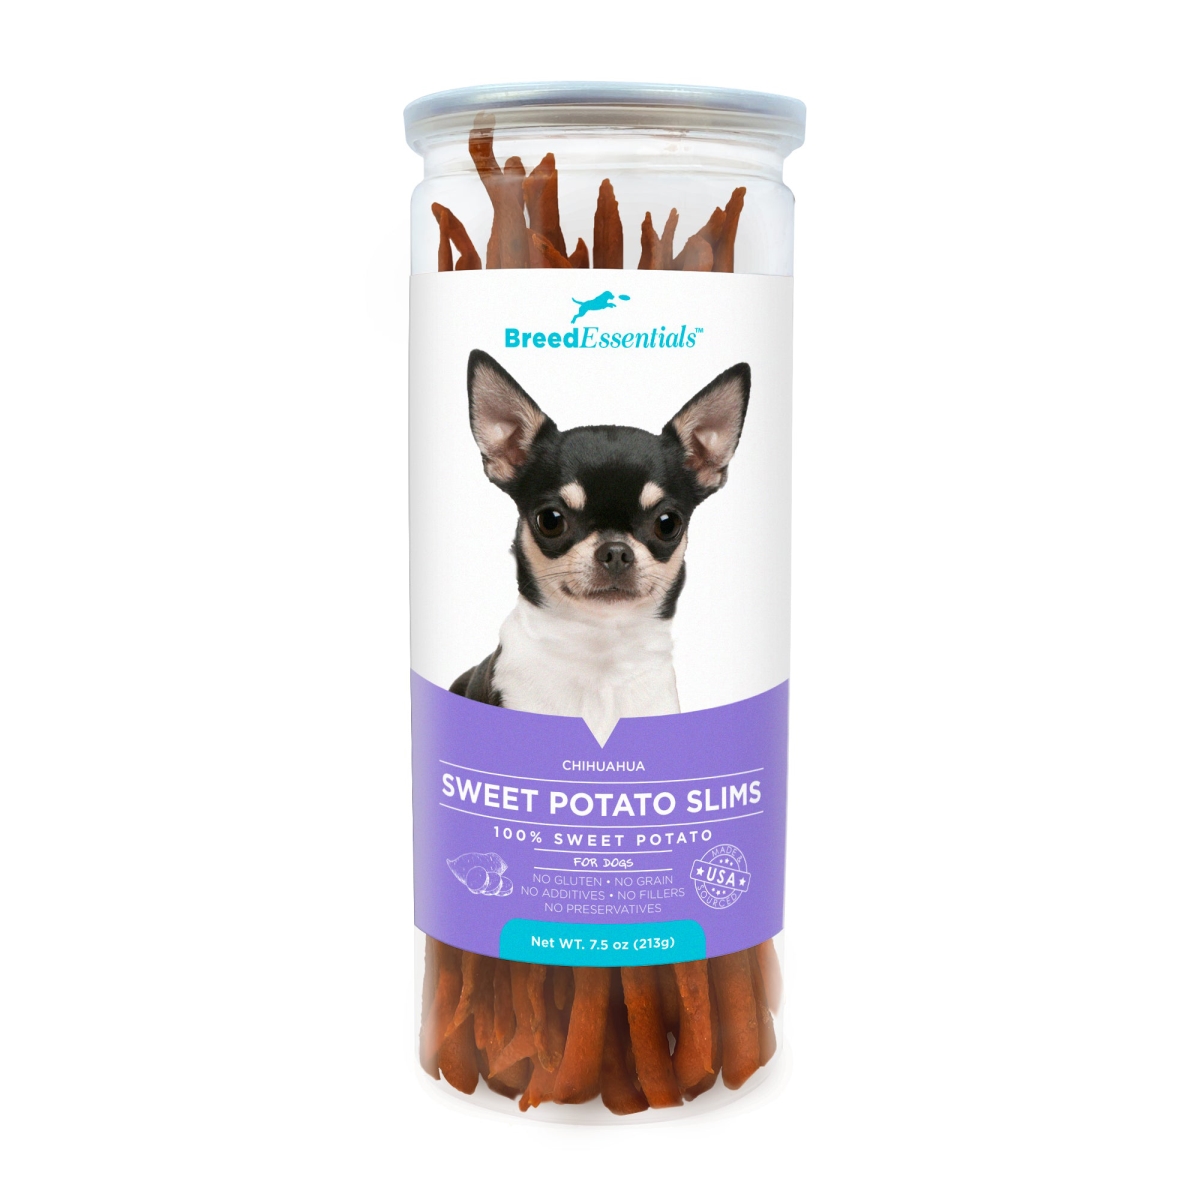 Picture of Breed Essentials 197247000556 7.5 oz Sweet Potato Slims - Chihuahua